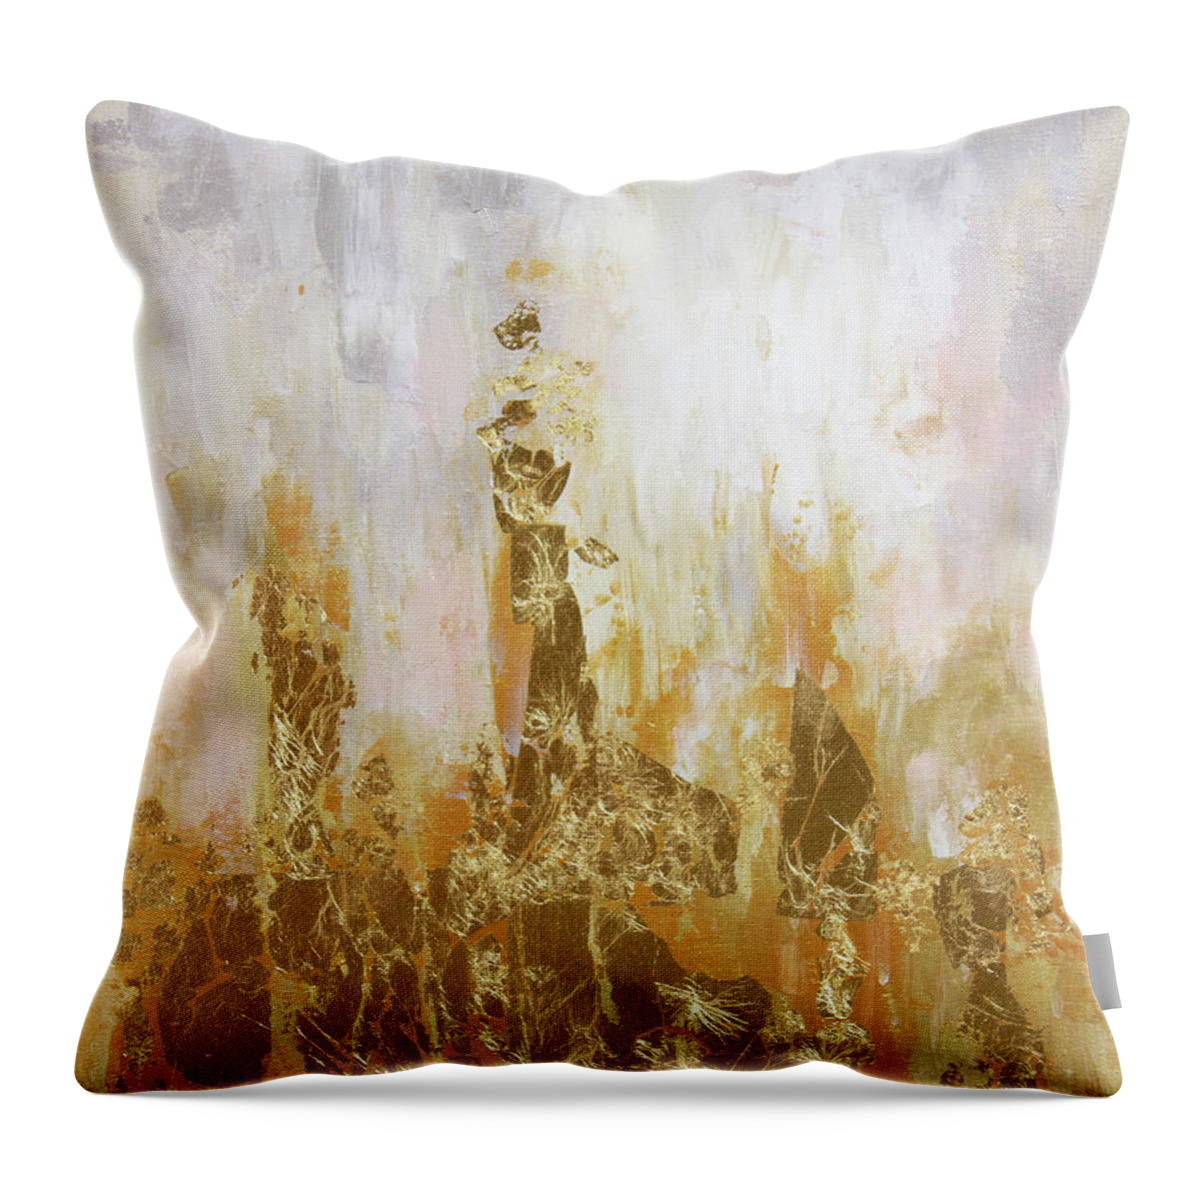 Gold Leaf Throw Pillow featuring the painting I Believe in You by Linh Nguyen-Ng